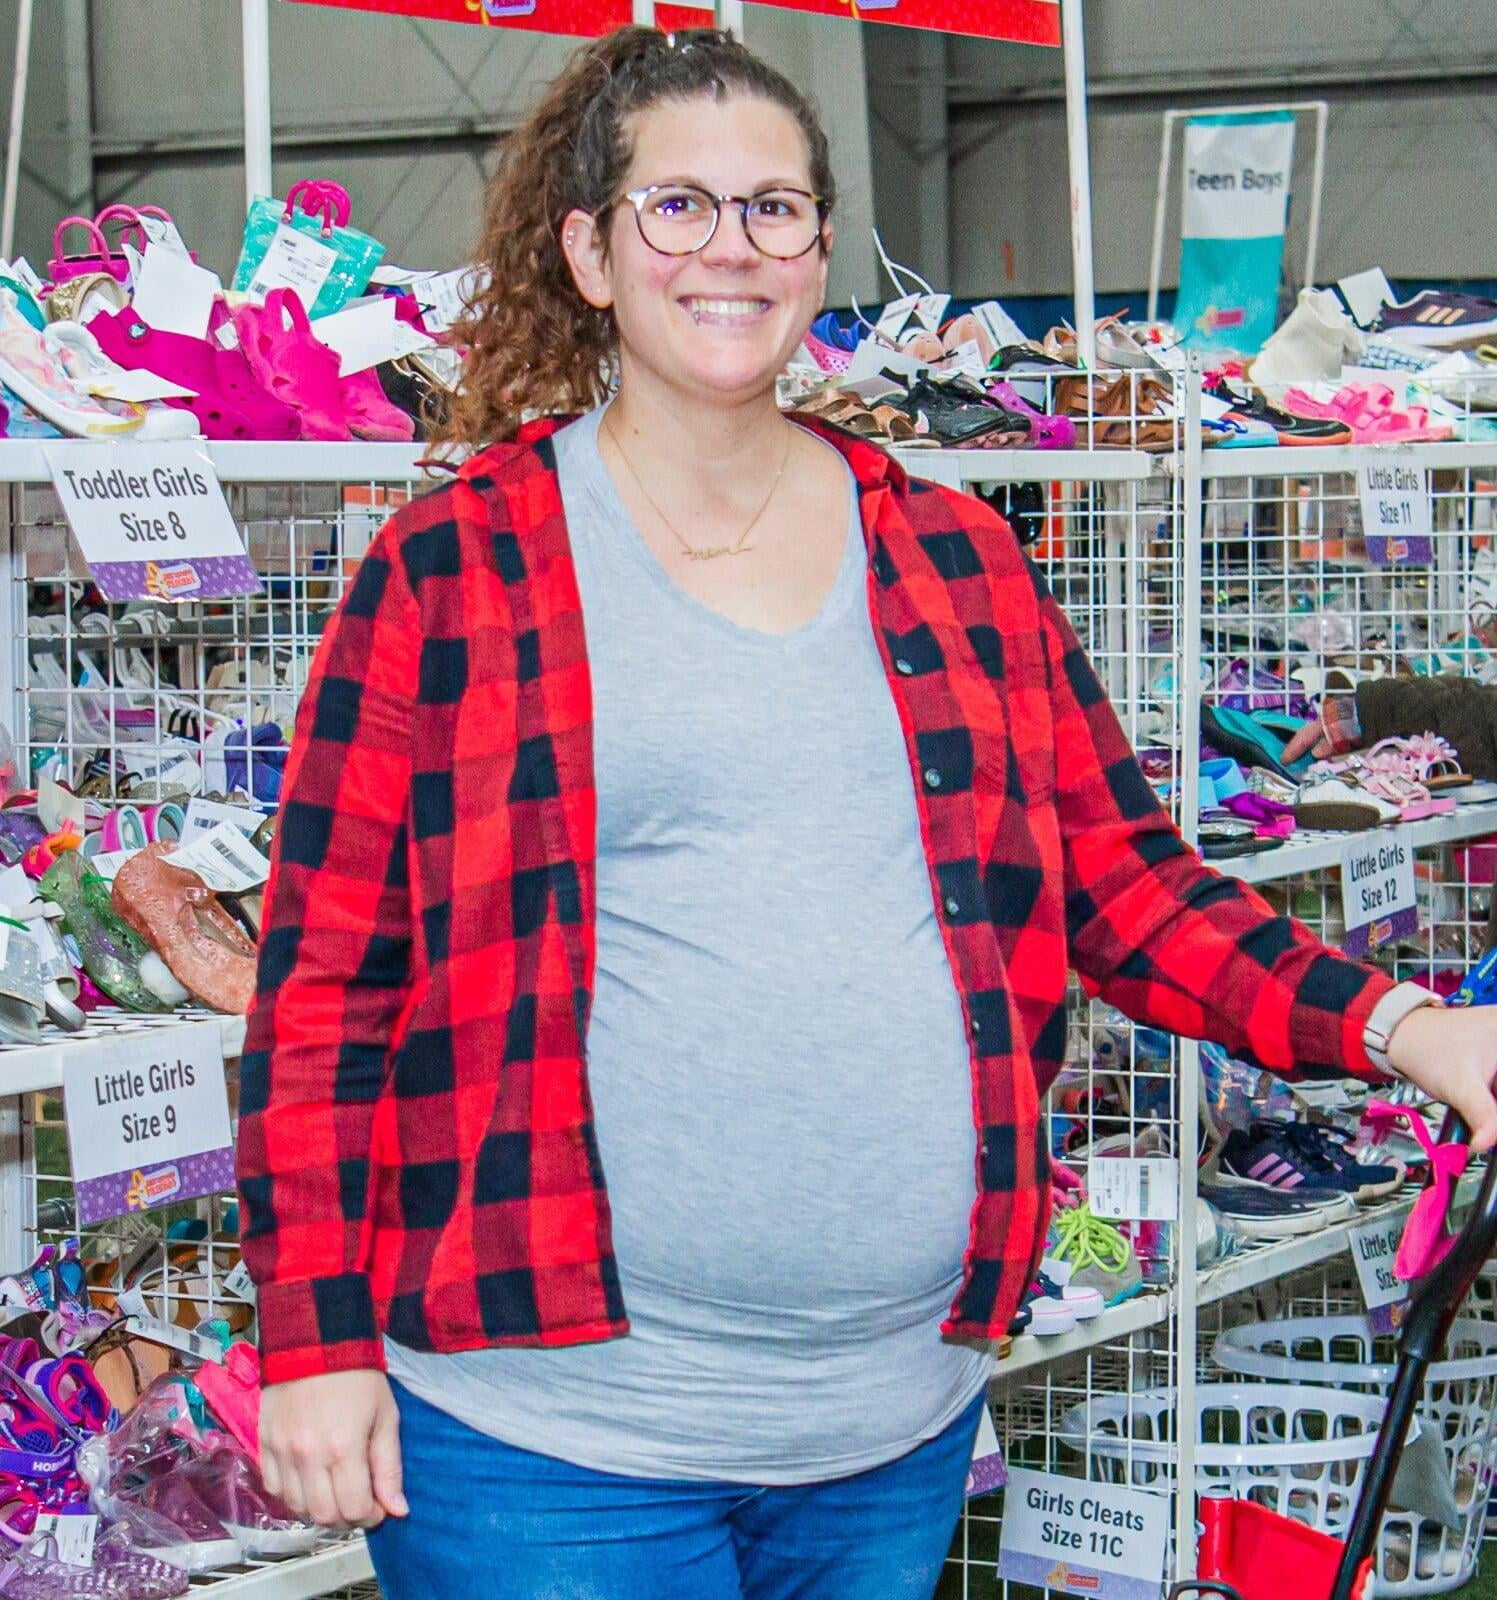 Pregnant woman smiles as she is shopping.